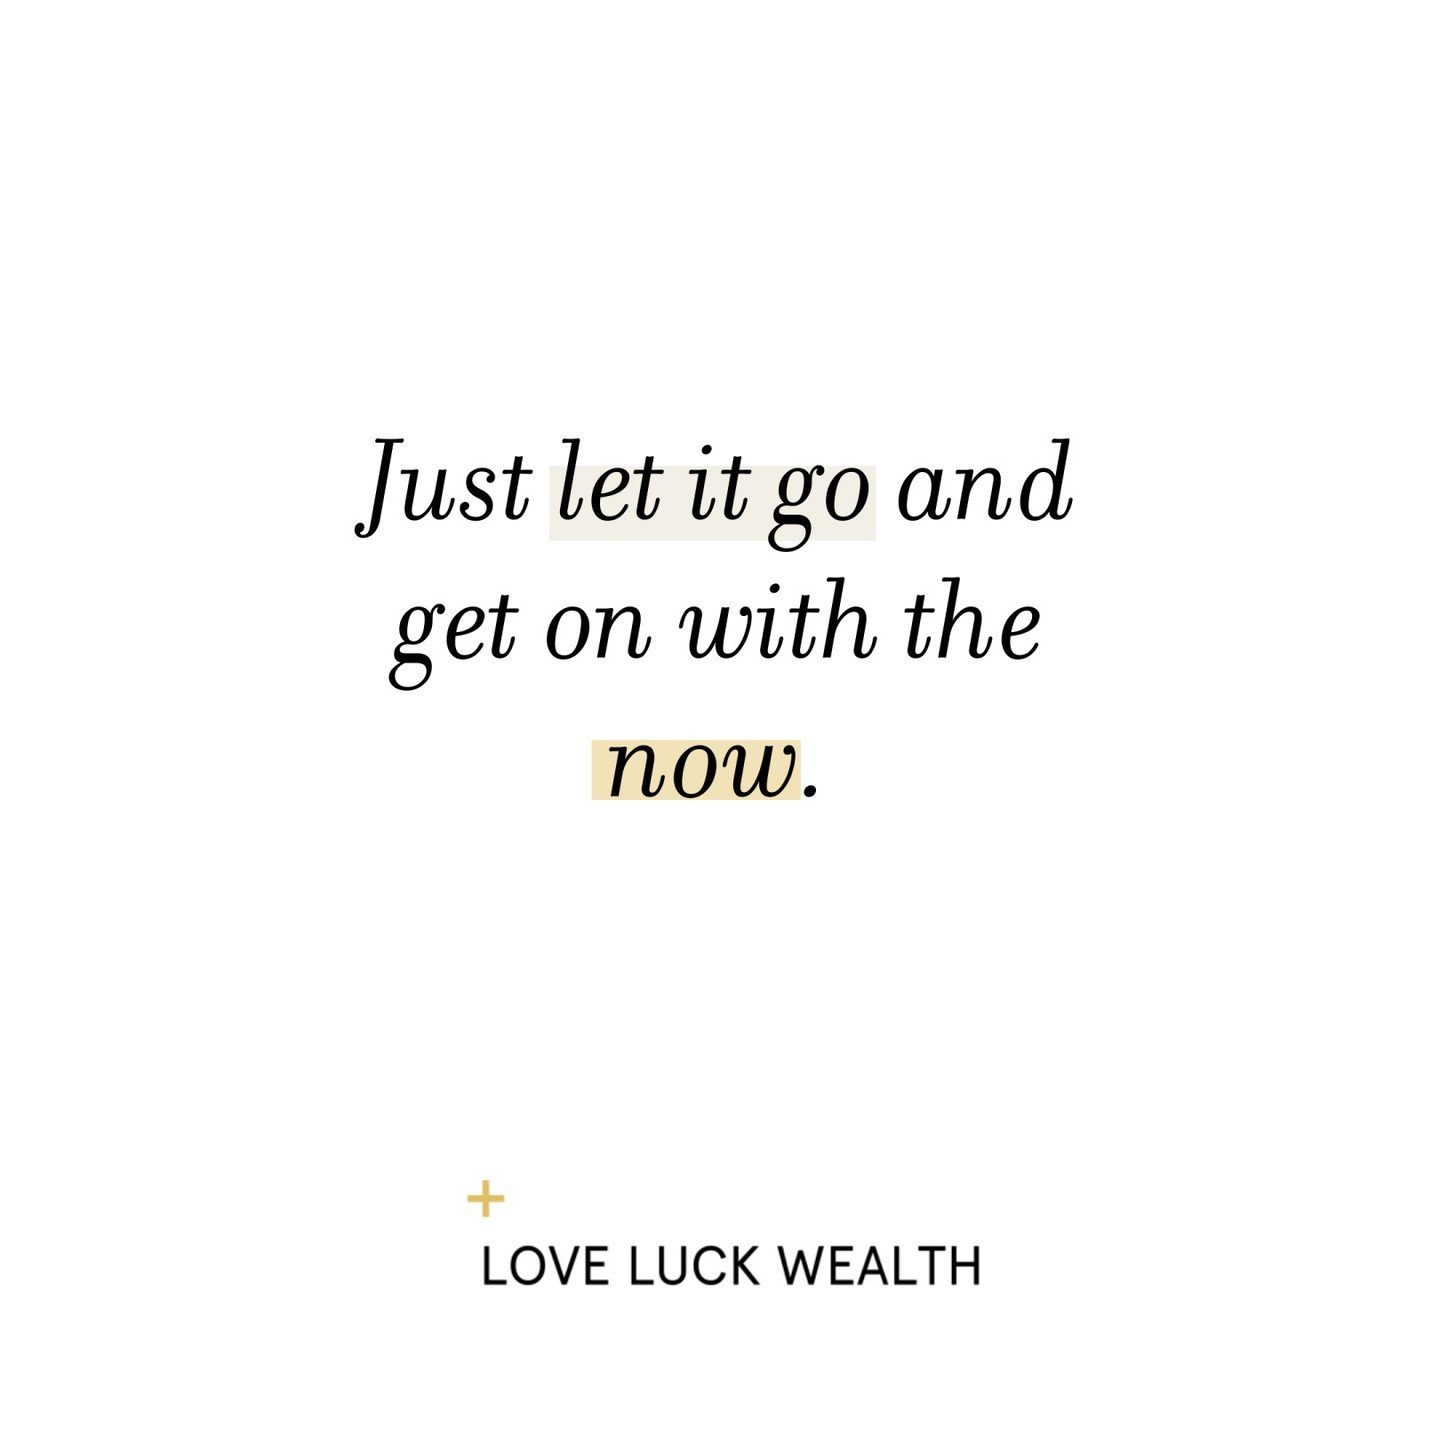 Worrying about money is futile.

It doesn&rsquo;t help deliver better outcomes. It doesn&rsquo;t make you feel better.

Instead, let it go and get on with the NOW.

Now is the time to get things that can make a difference to your future finances done